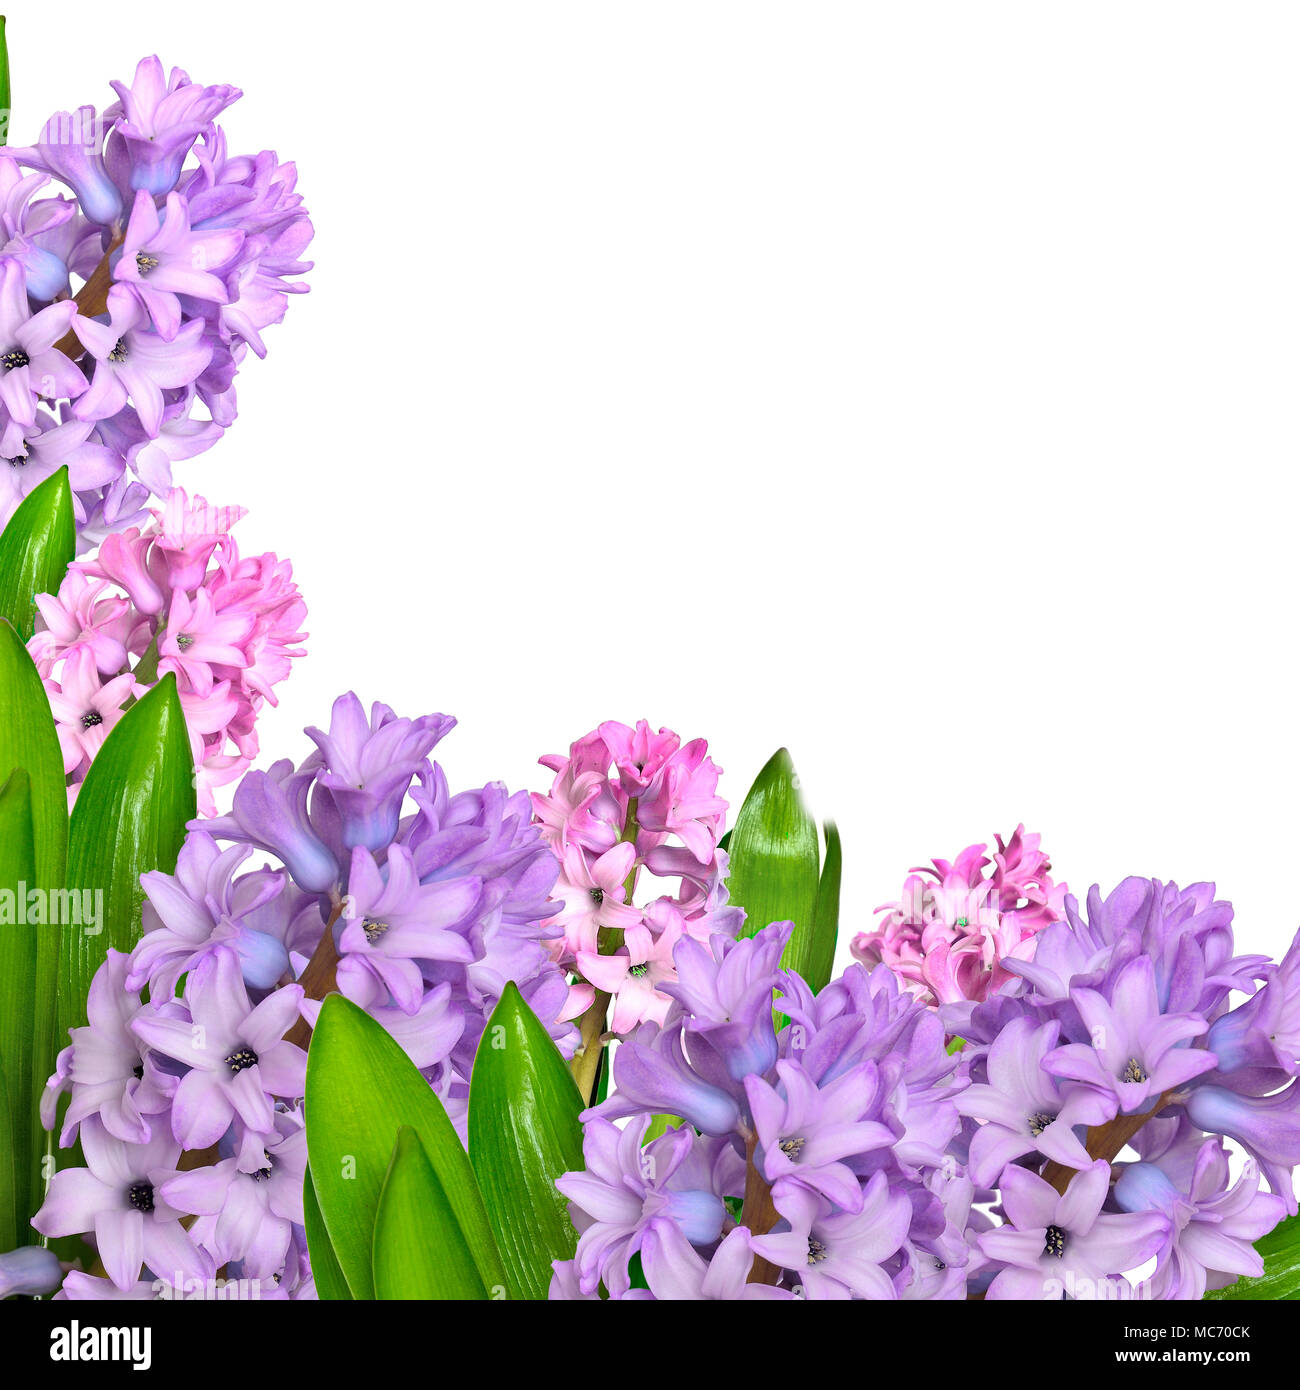 Early spring delicate floral background with lilac and pink hyacinth flowers with leaves close up on white, with space for text Stock Photo